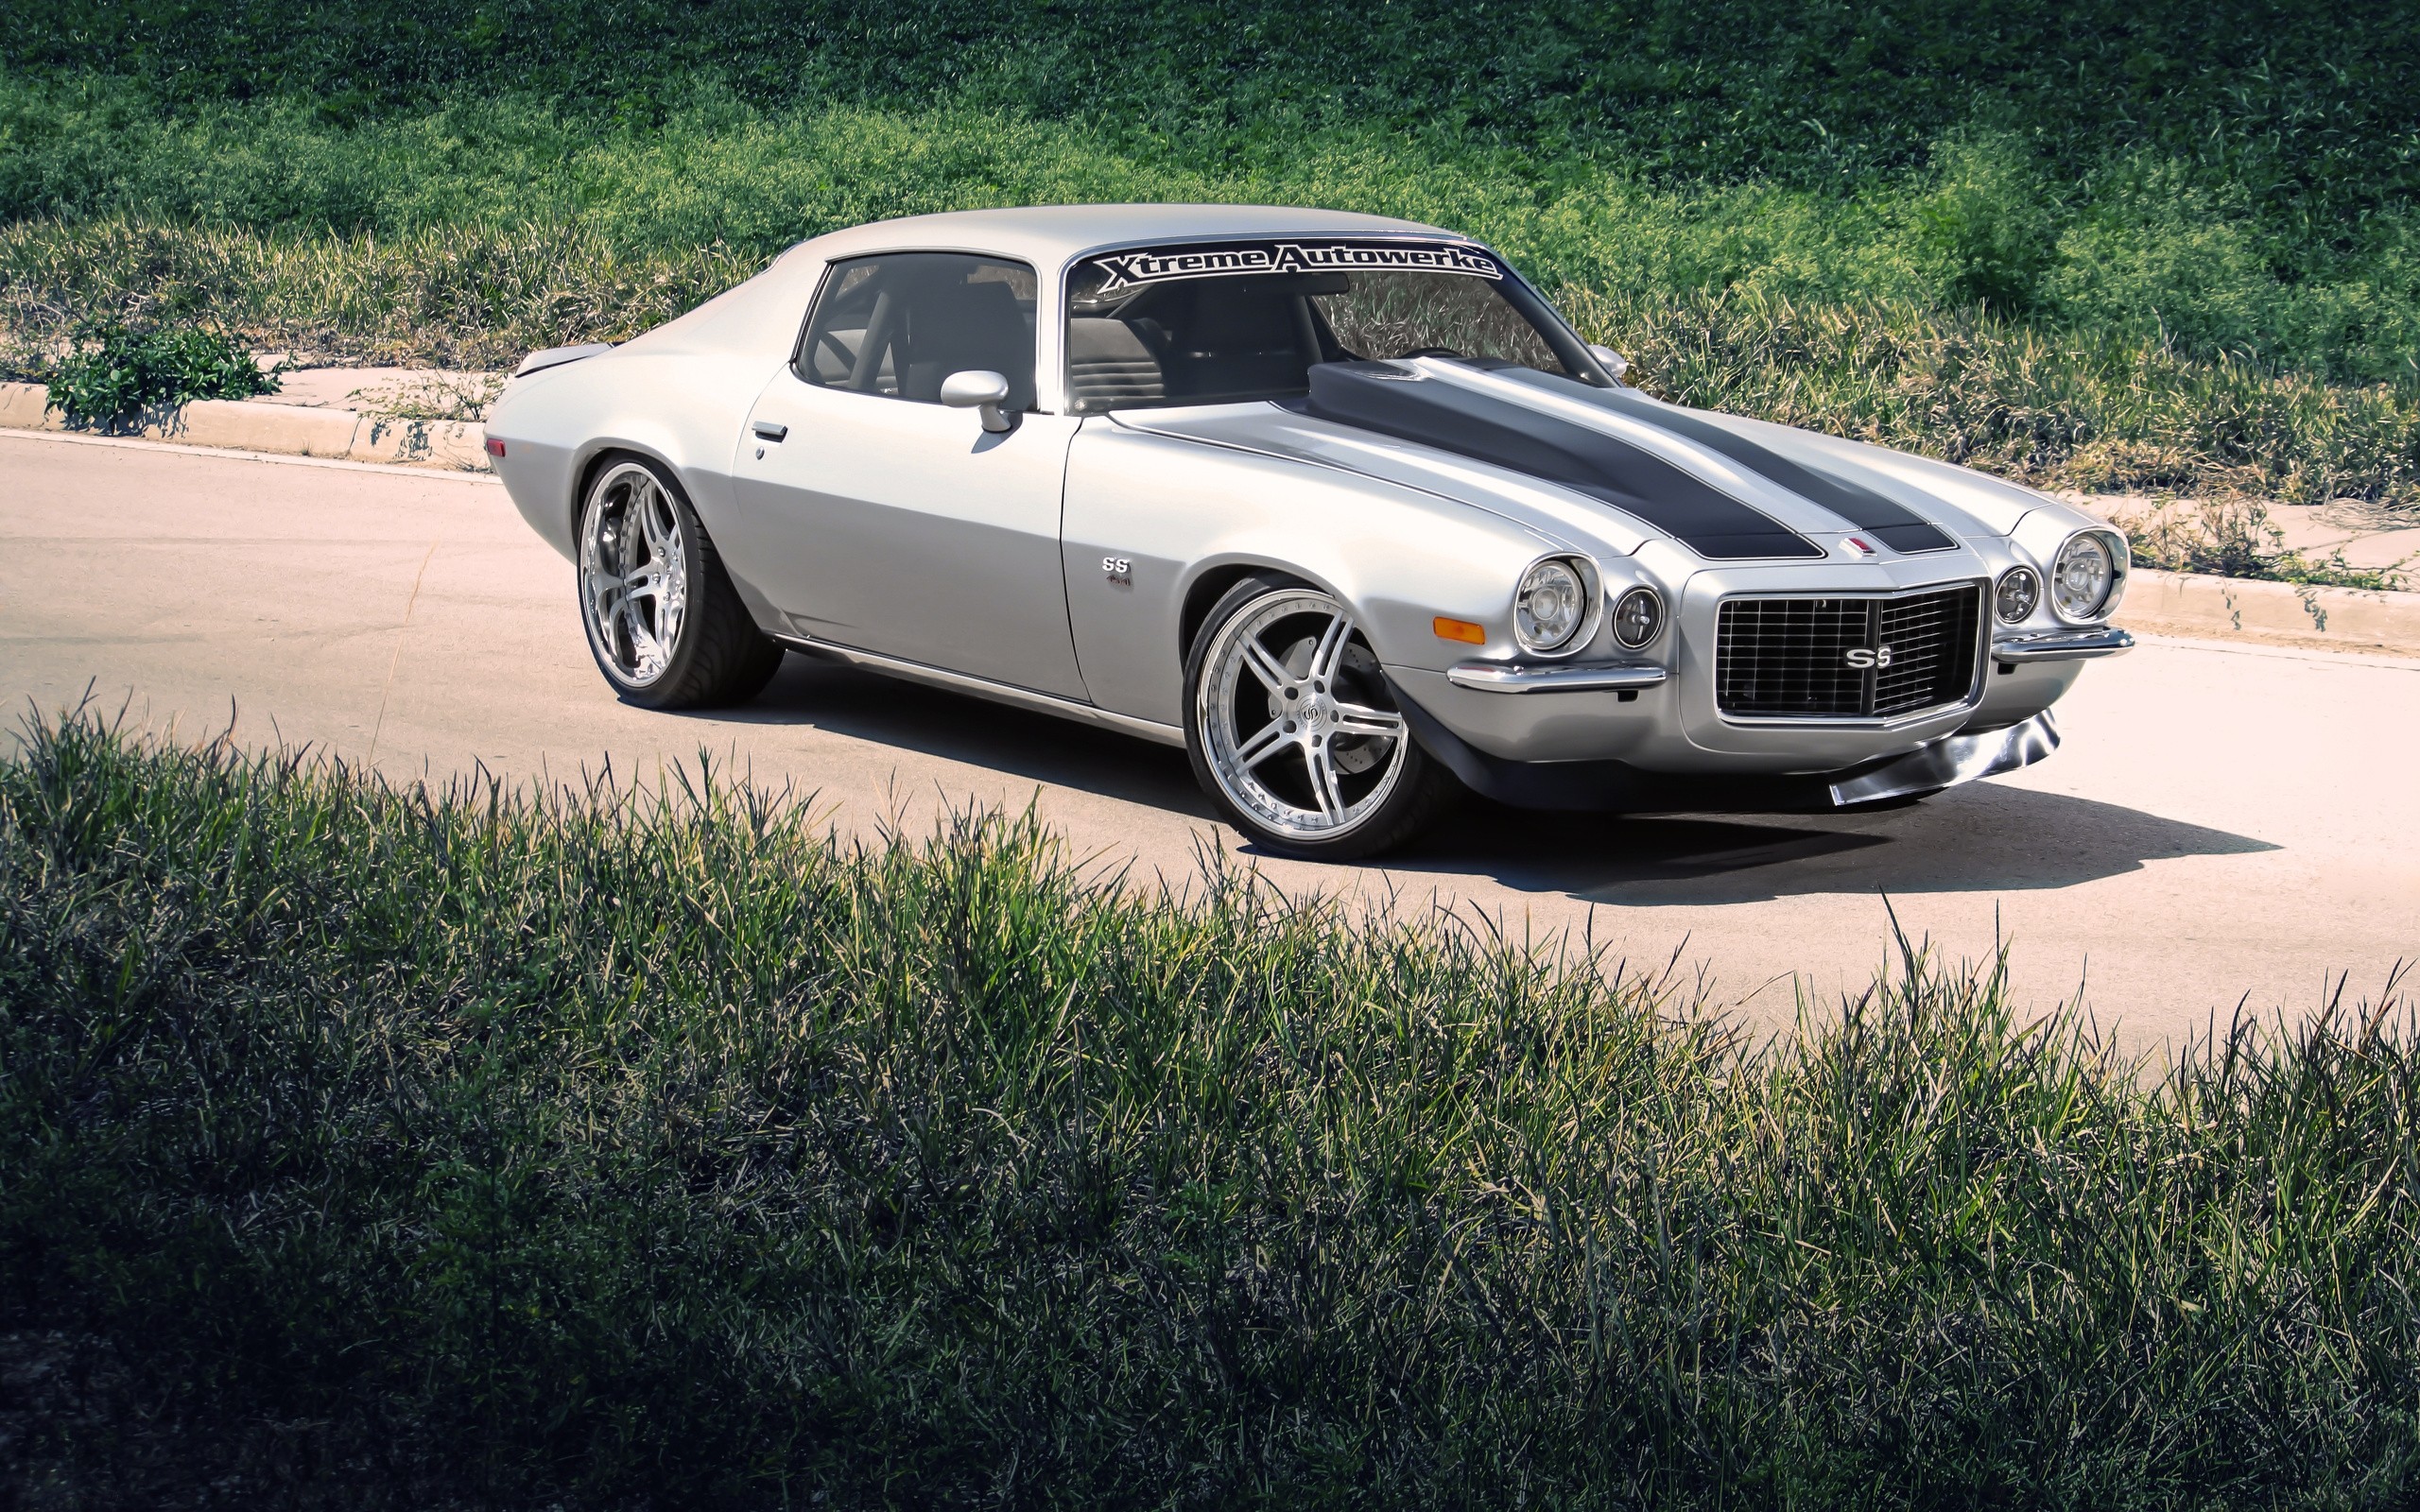 General 2560x1600 car silver cars vehicle Chevrolet Chevrolet Camaro muscle cars American cars